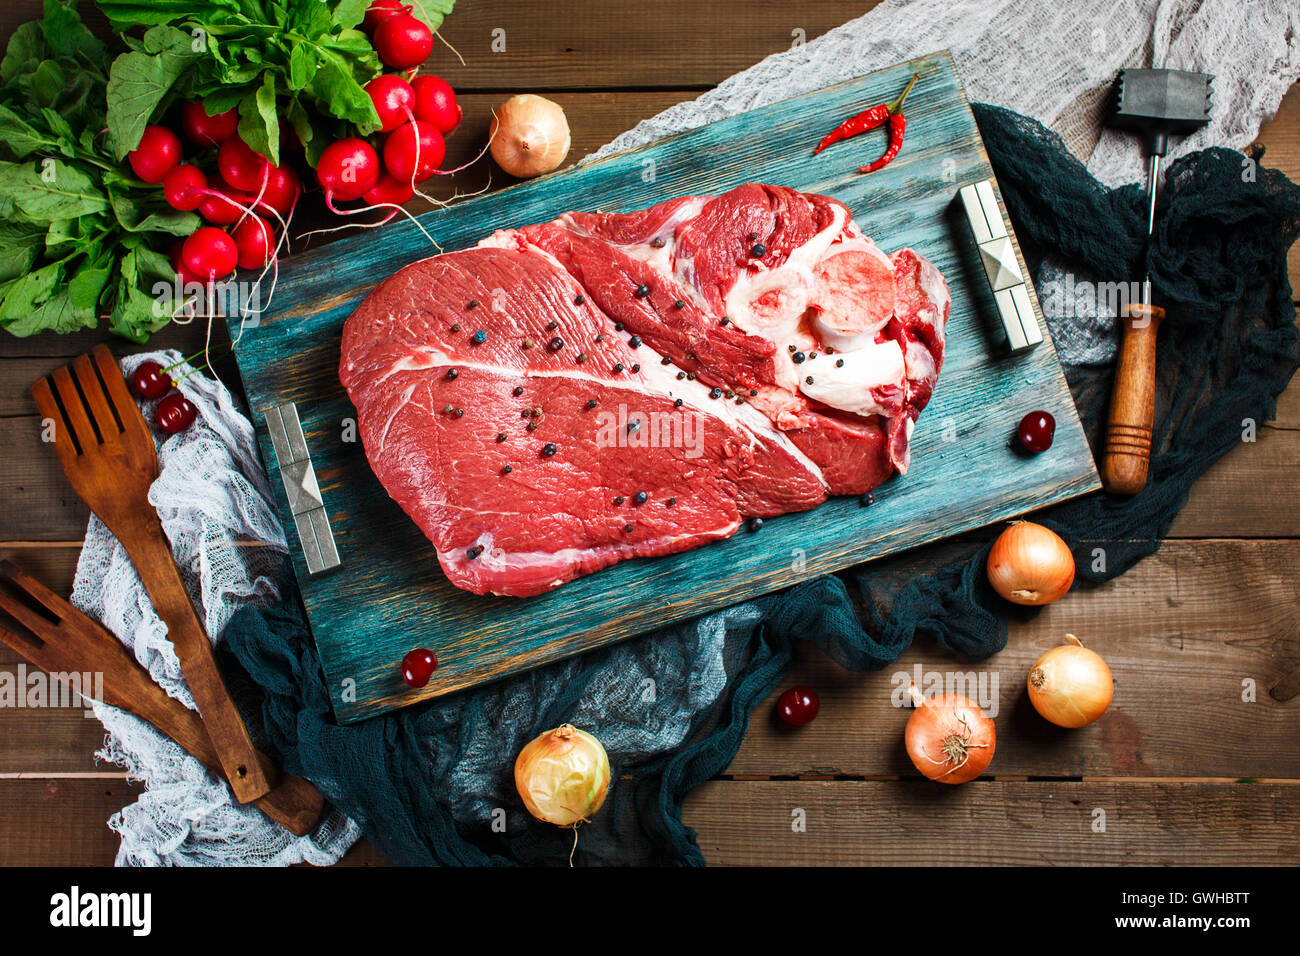 Fresh beef veal meat on rustic wooden table with kitchen utensils and vegetables, top view Stock Photo